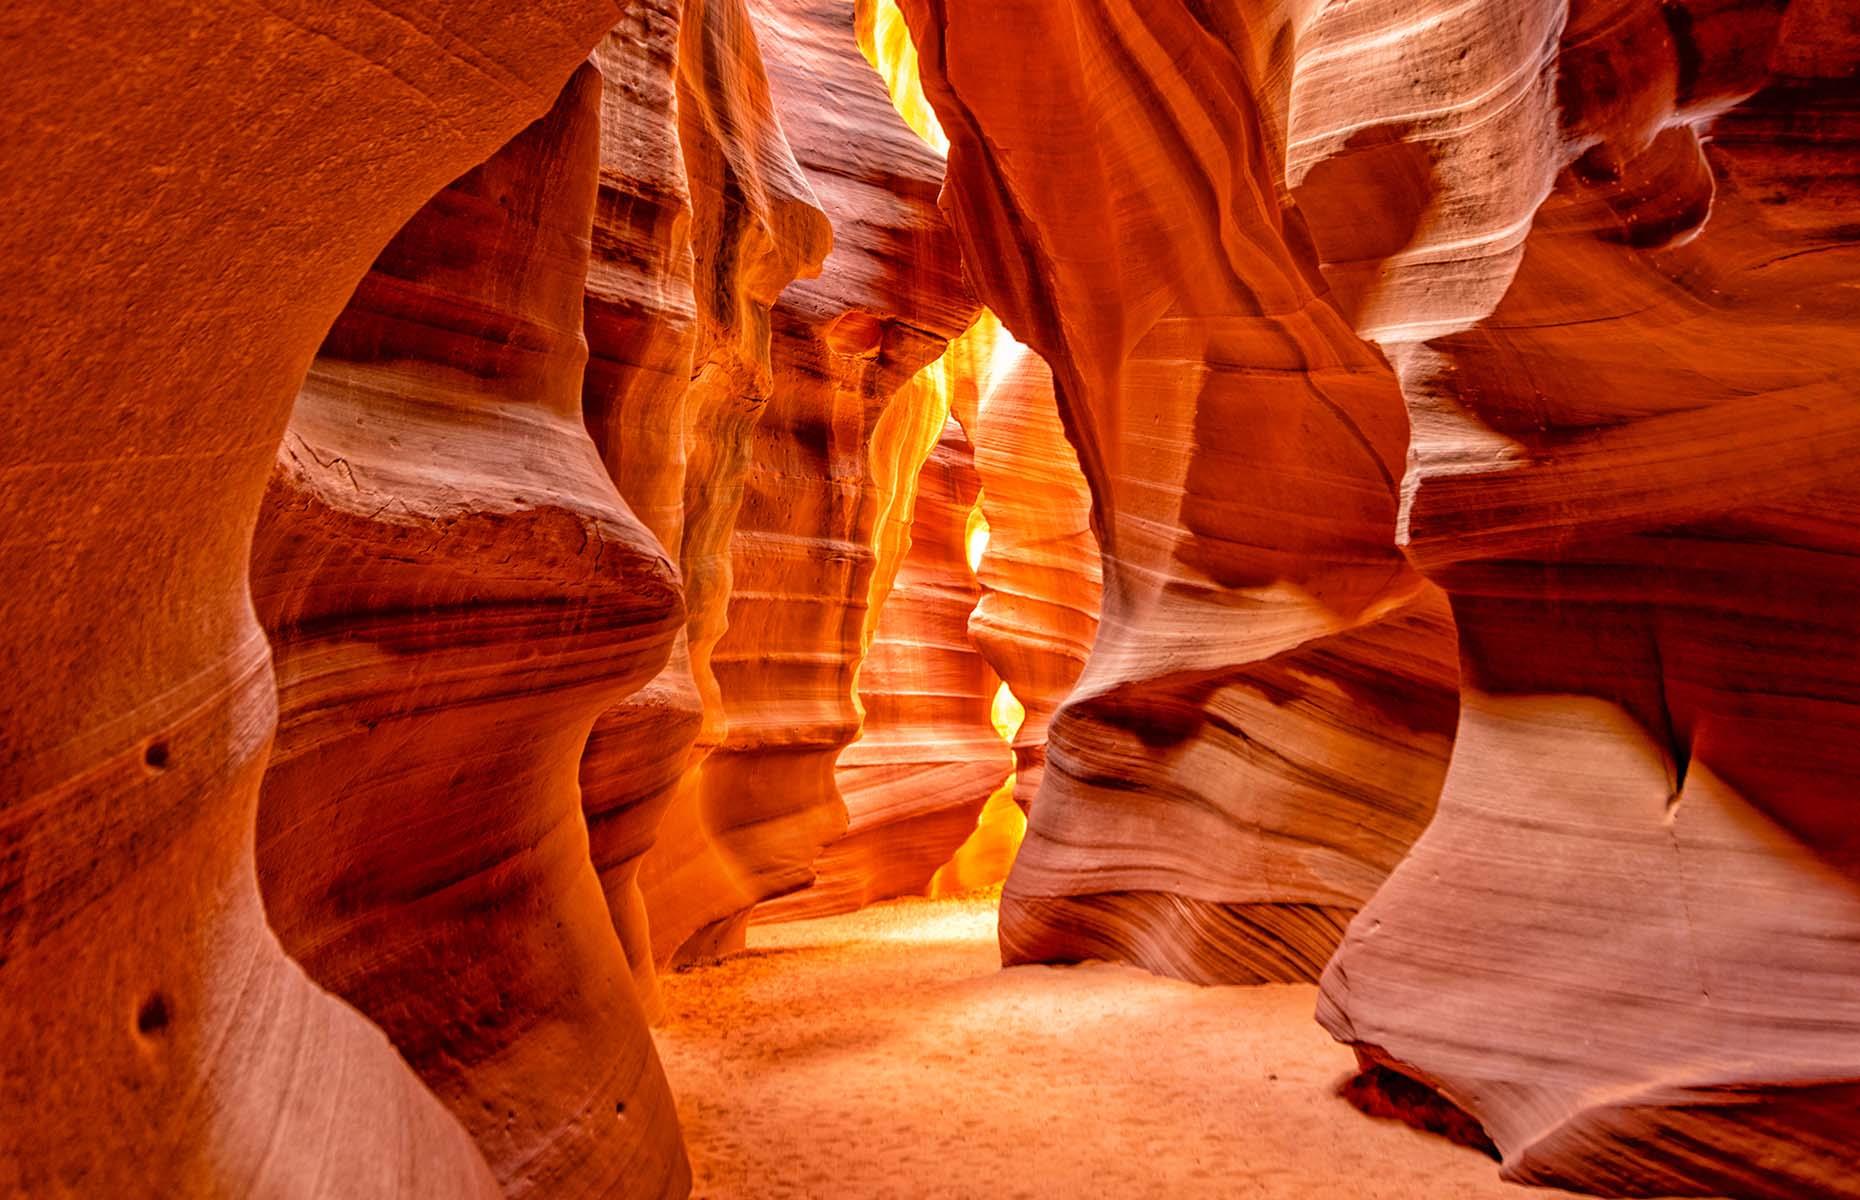 The valleys of Antelope Canyon in Arizona were created over thousands of years by flash flooding, which eroded the sandstone pathways and shaped the distinctive curves you see today. What many don't know is that it's actually two separate slot canyons – Upper Antelope Canyon, or The Crack, and Lower Antelope Canyon, or The Corkscrew – but both make for a mesmerising sight.